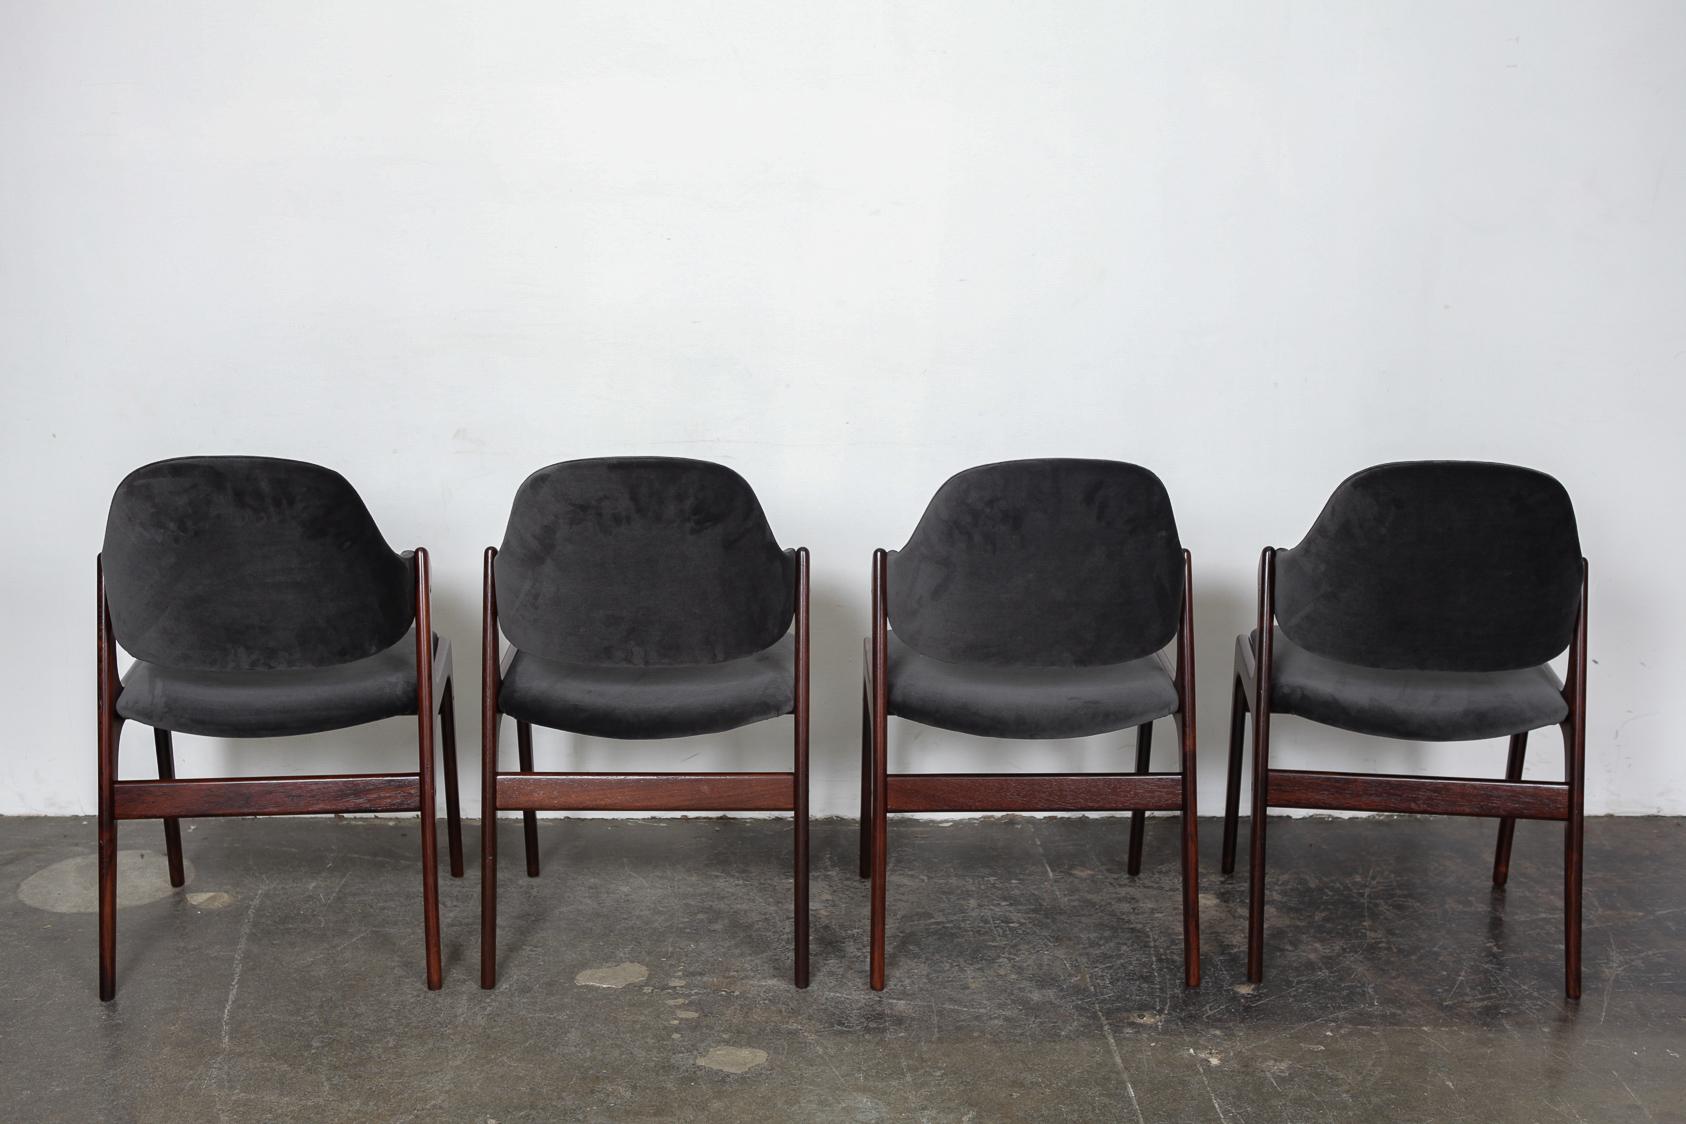 Lacquered Set of 4 1960s Danish Solid Rosewood Dining Chairs by Gern Mobelfabrik